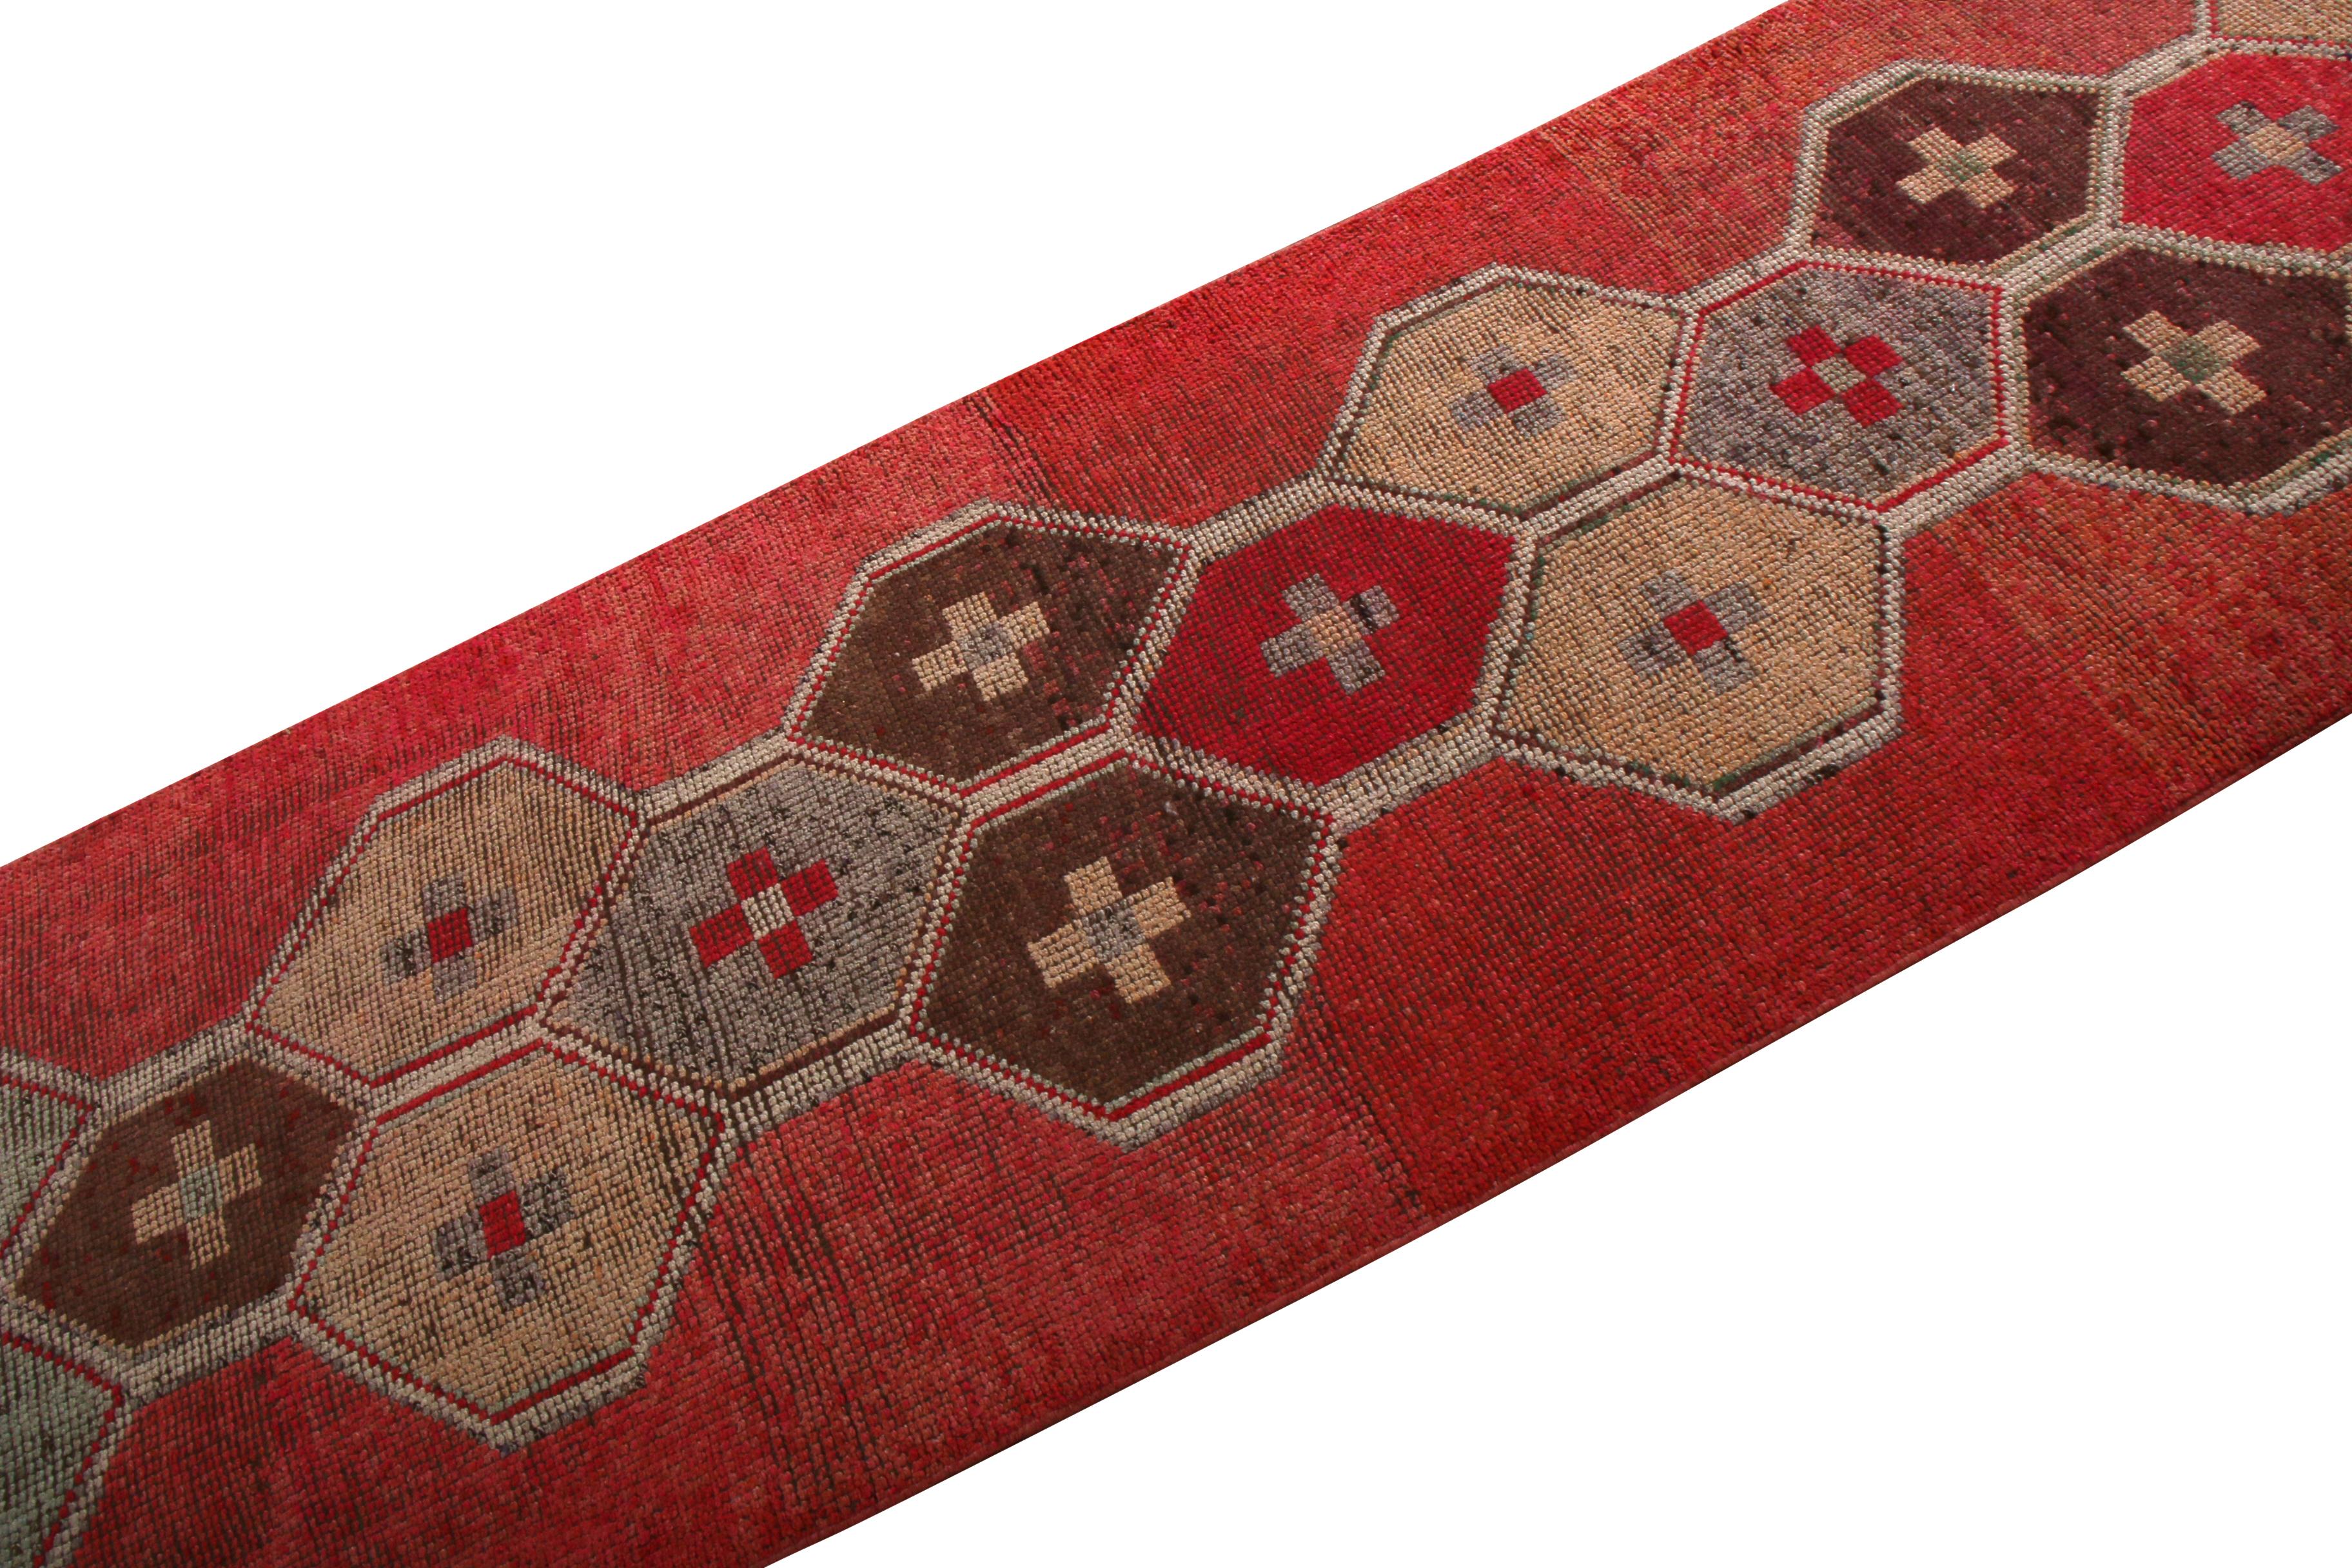 Hand-Woven Vintage 1950s Red Runner Beige-Brown Blue Embroidery Pattern by Rug & Kilim For Sale